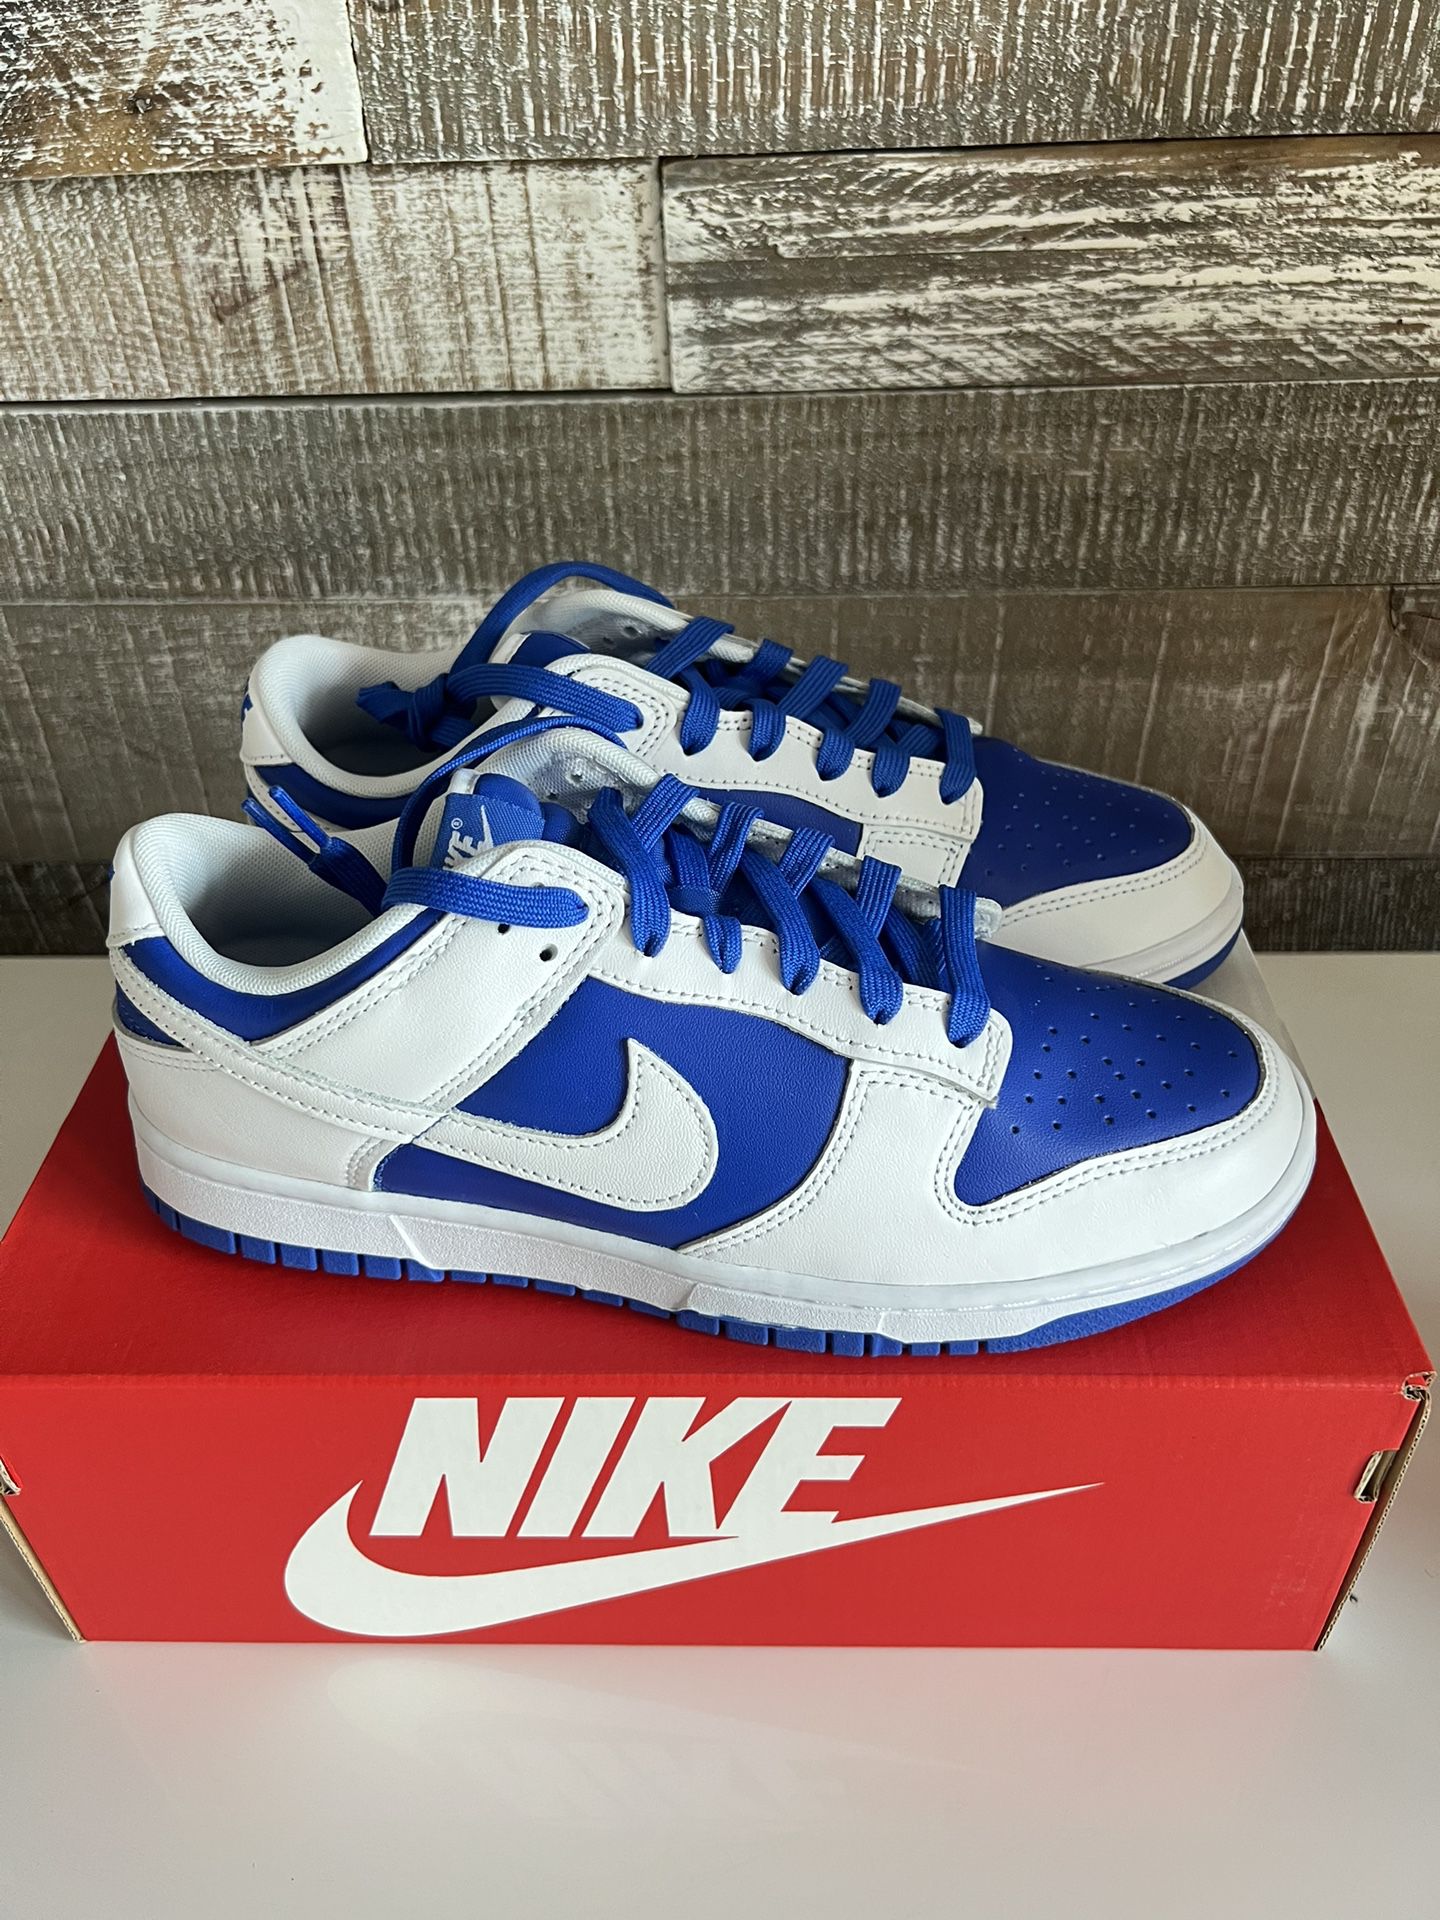 New Nike Dunk Low Racer Blue Size 8.5M